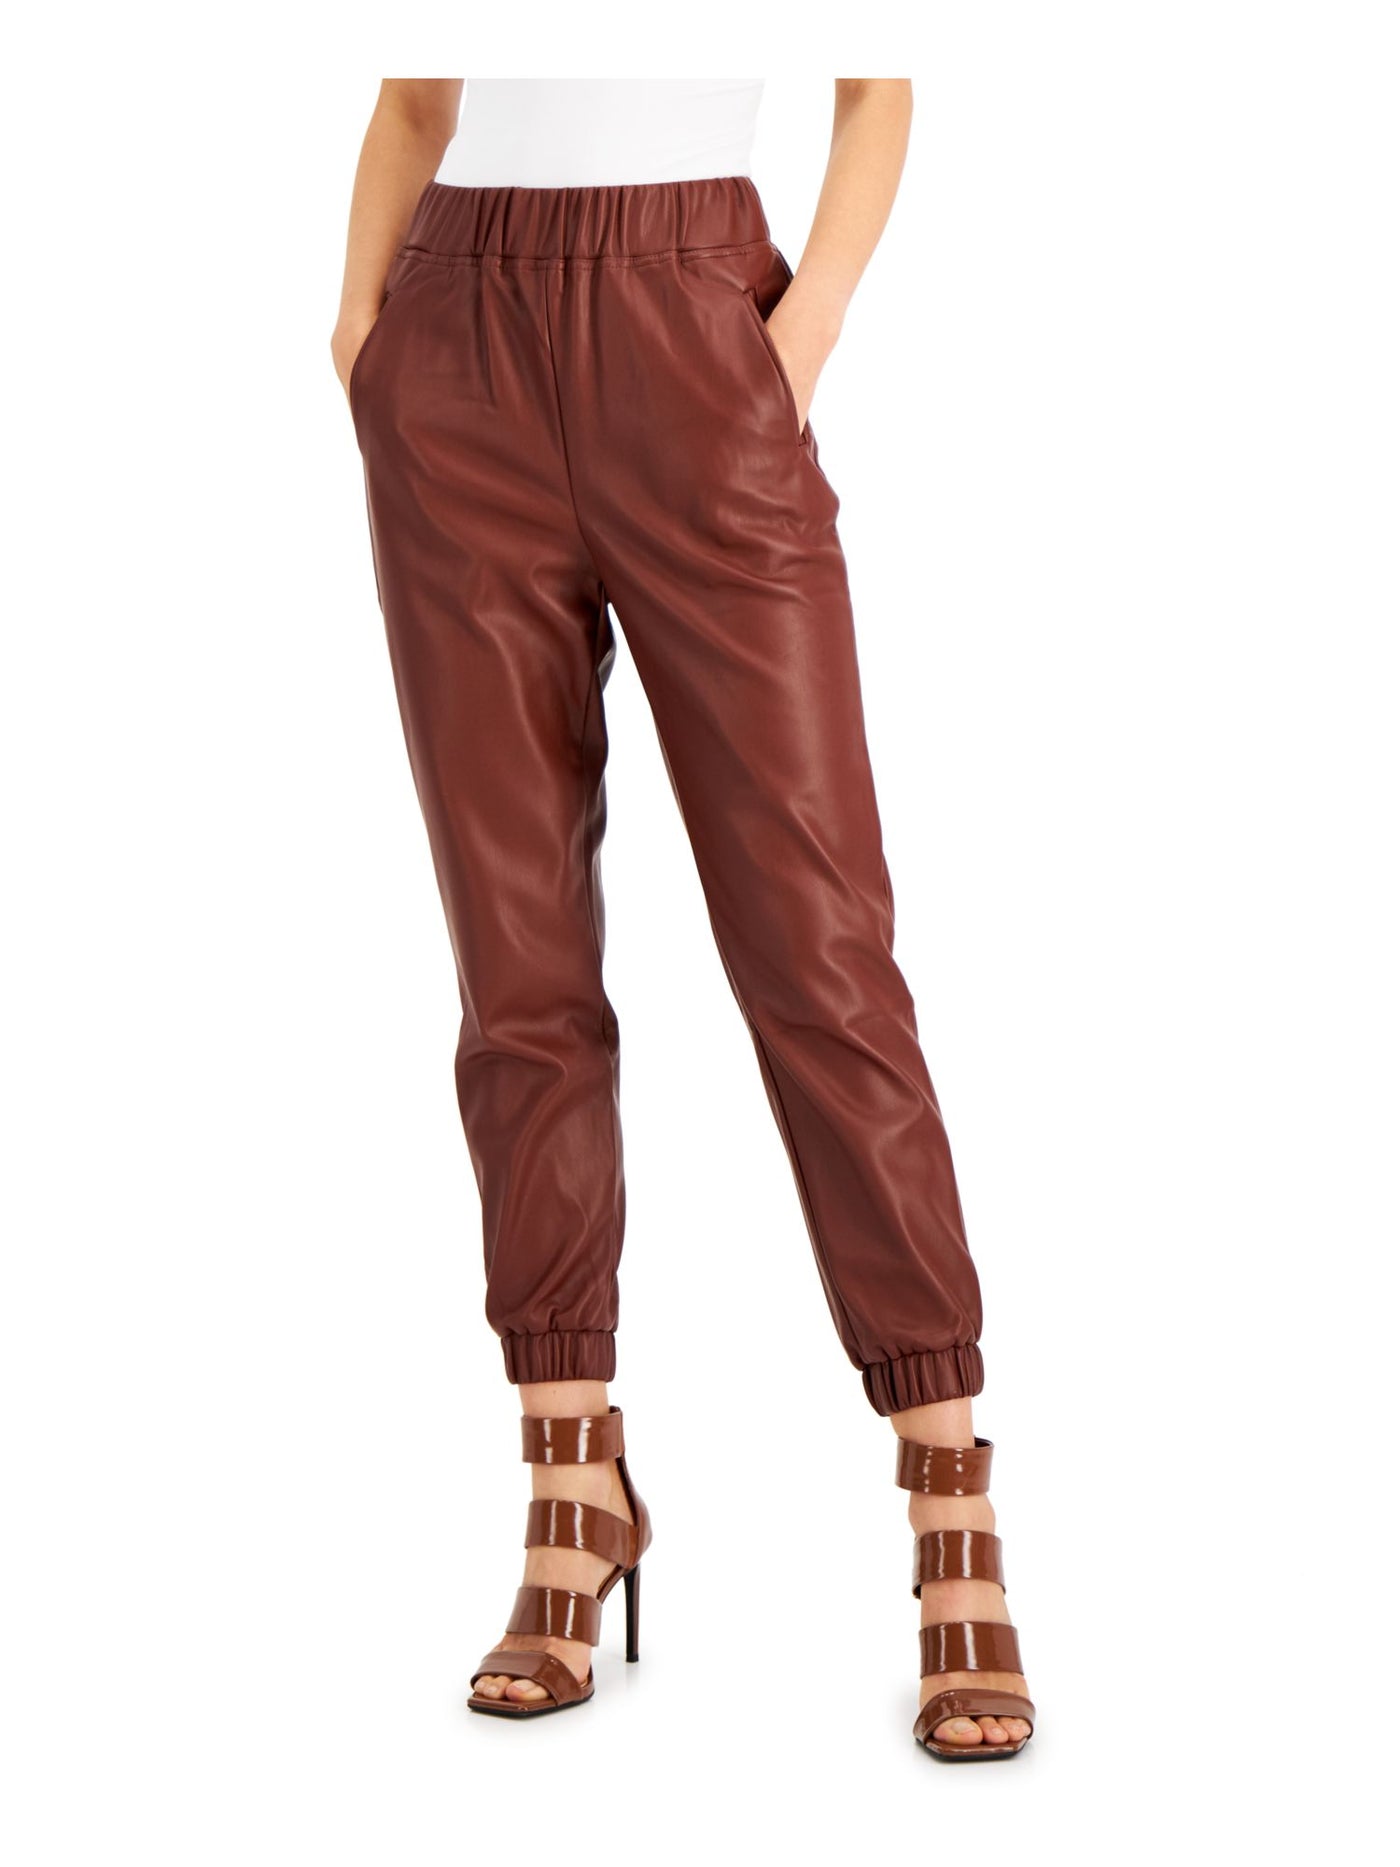 INC Womens Brown Faux Leather Pocketed Elasticized Waistband And Cuffs Wear To Work High Waist Pants XXL